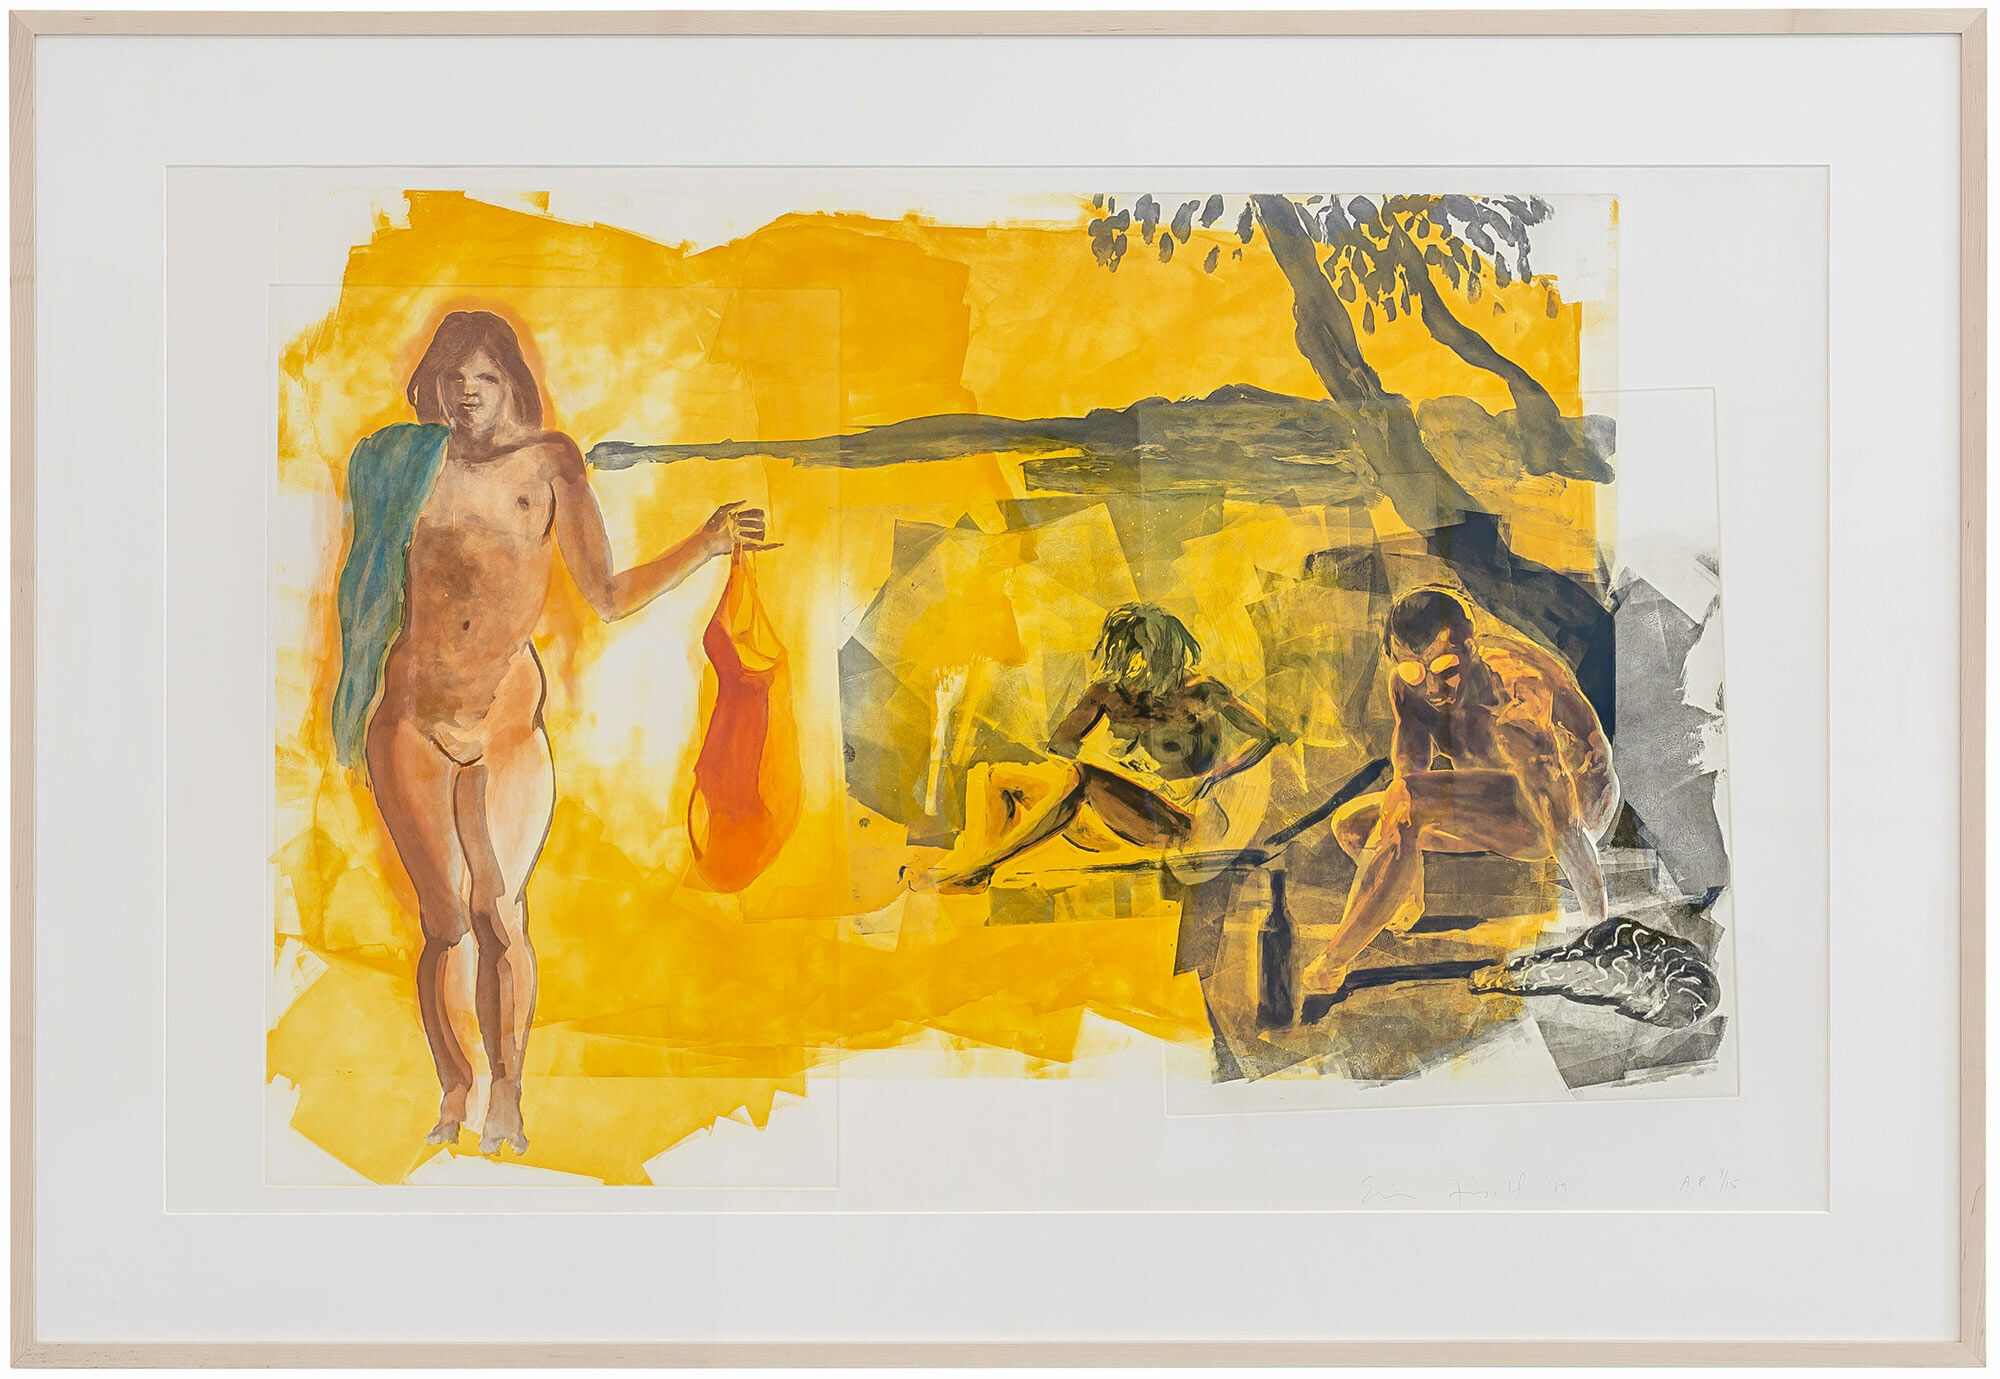 Picture "Rays" from the portfolio "Beach Scenes I-IV" (1989) by Eric Fischl